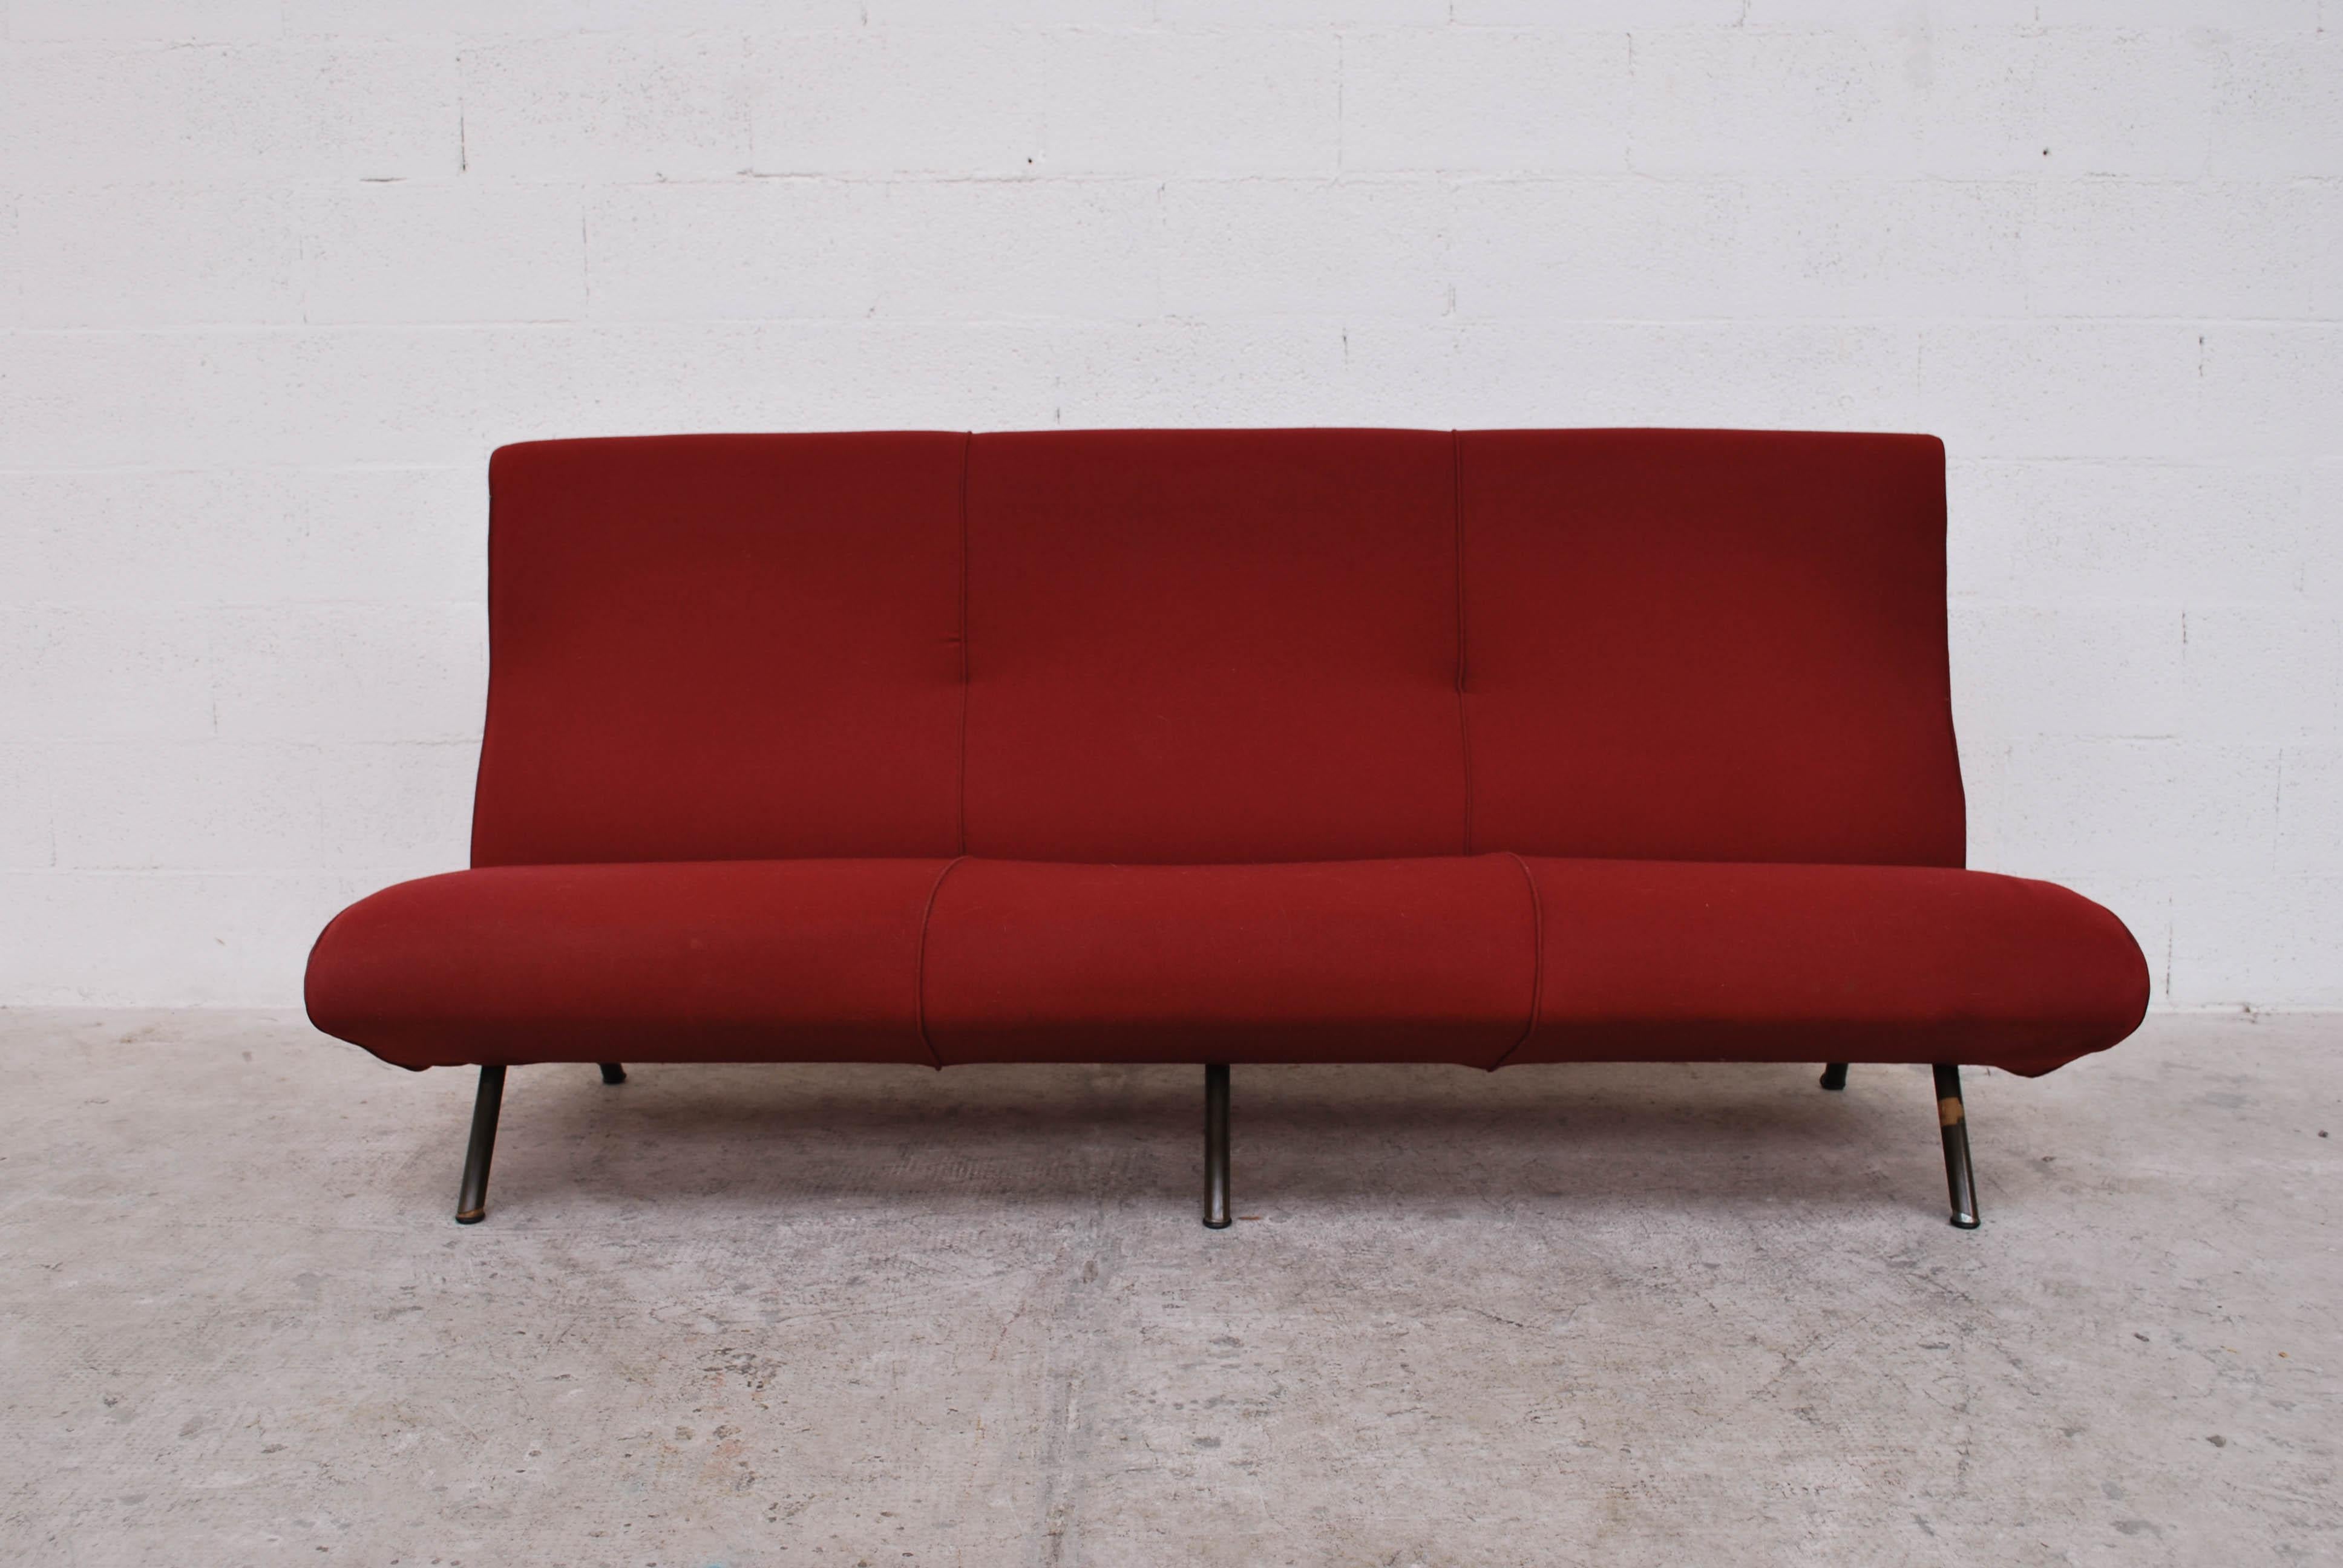 Triennale Three seat sofa designed by Marco Zanuso and produced by Arflex in 1951.
Original fabric and upholstery.

Architect, designer and university lecturer, Marco Zanuso (1916-2001) was one of the leading interpreters of the Modern Movement.